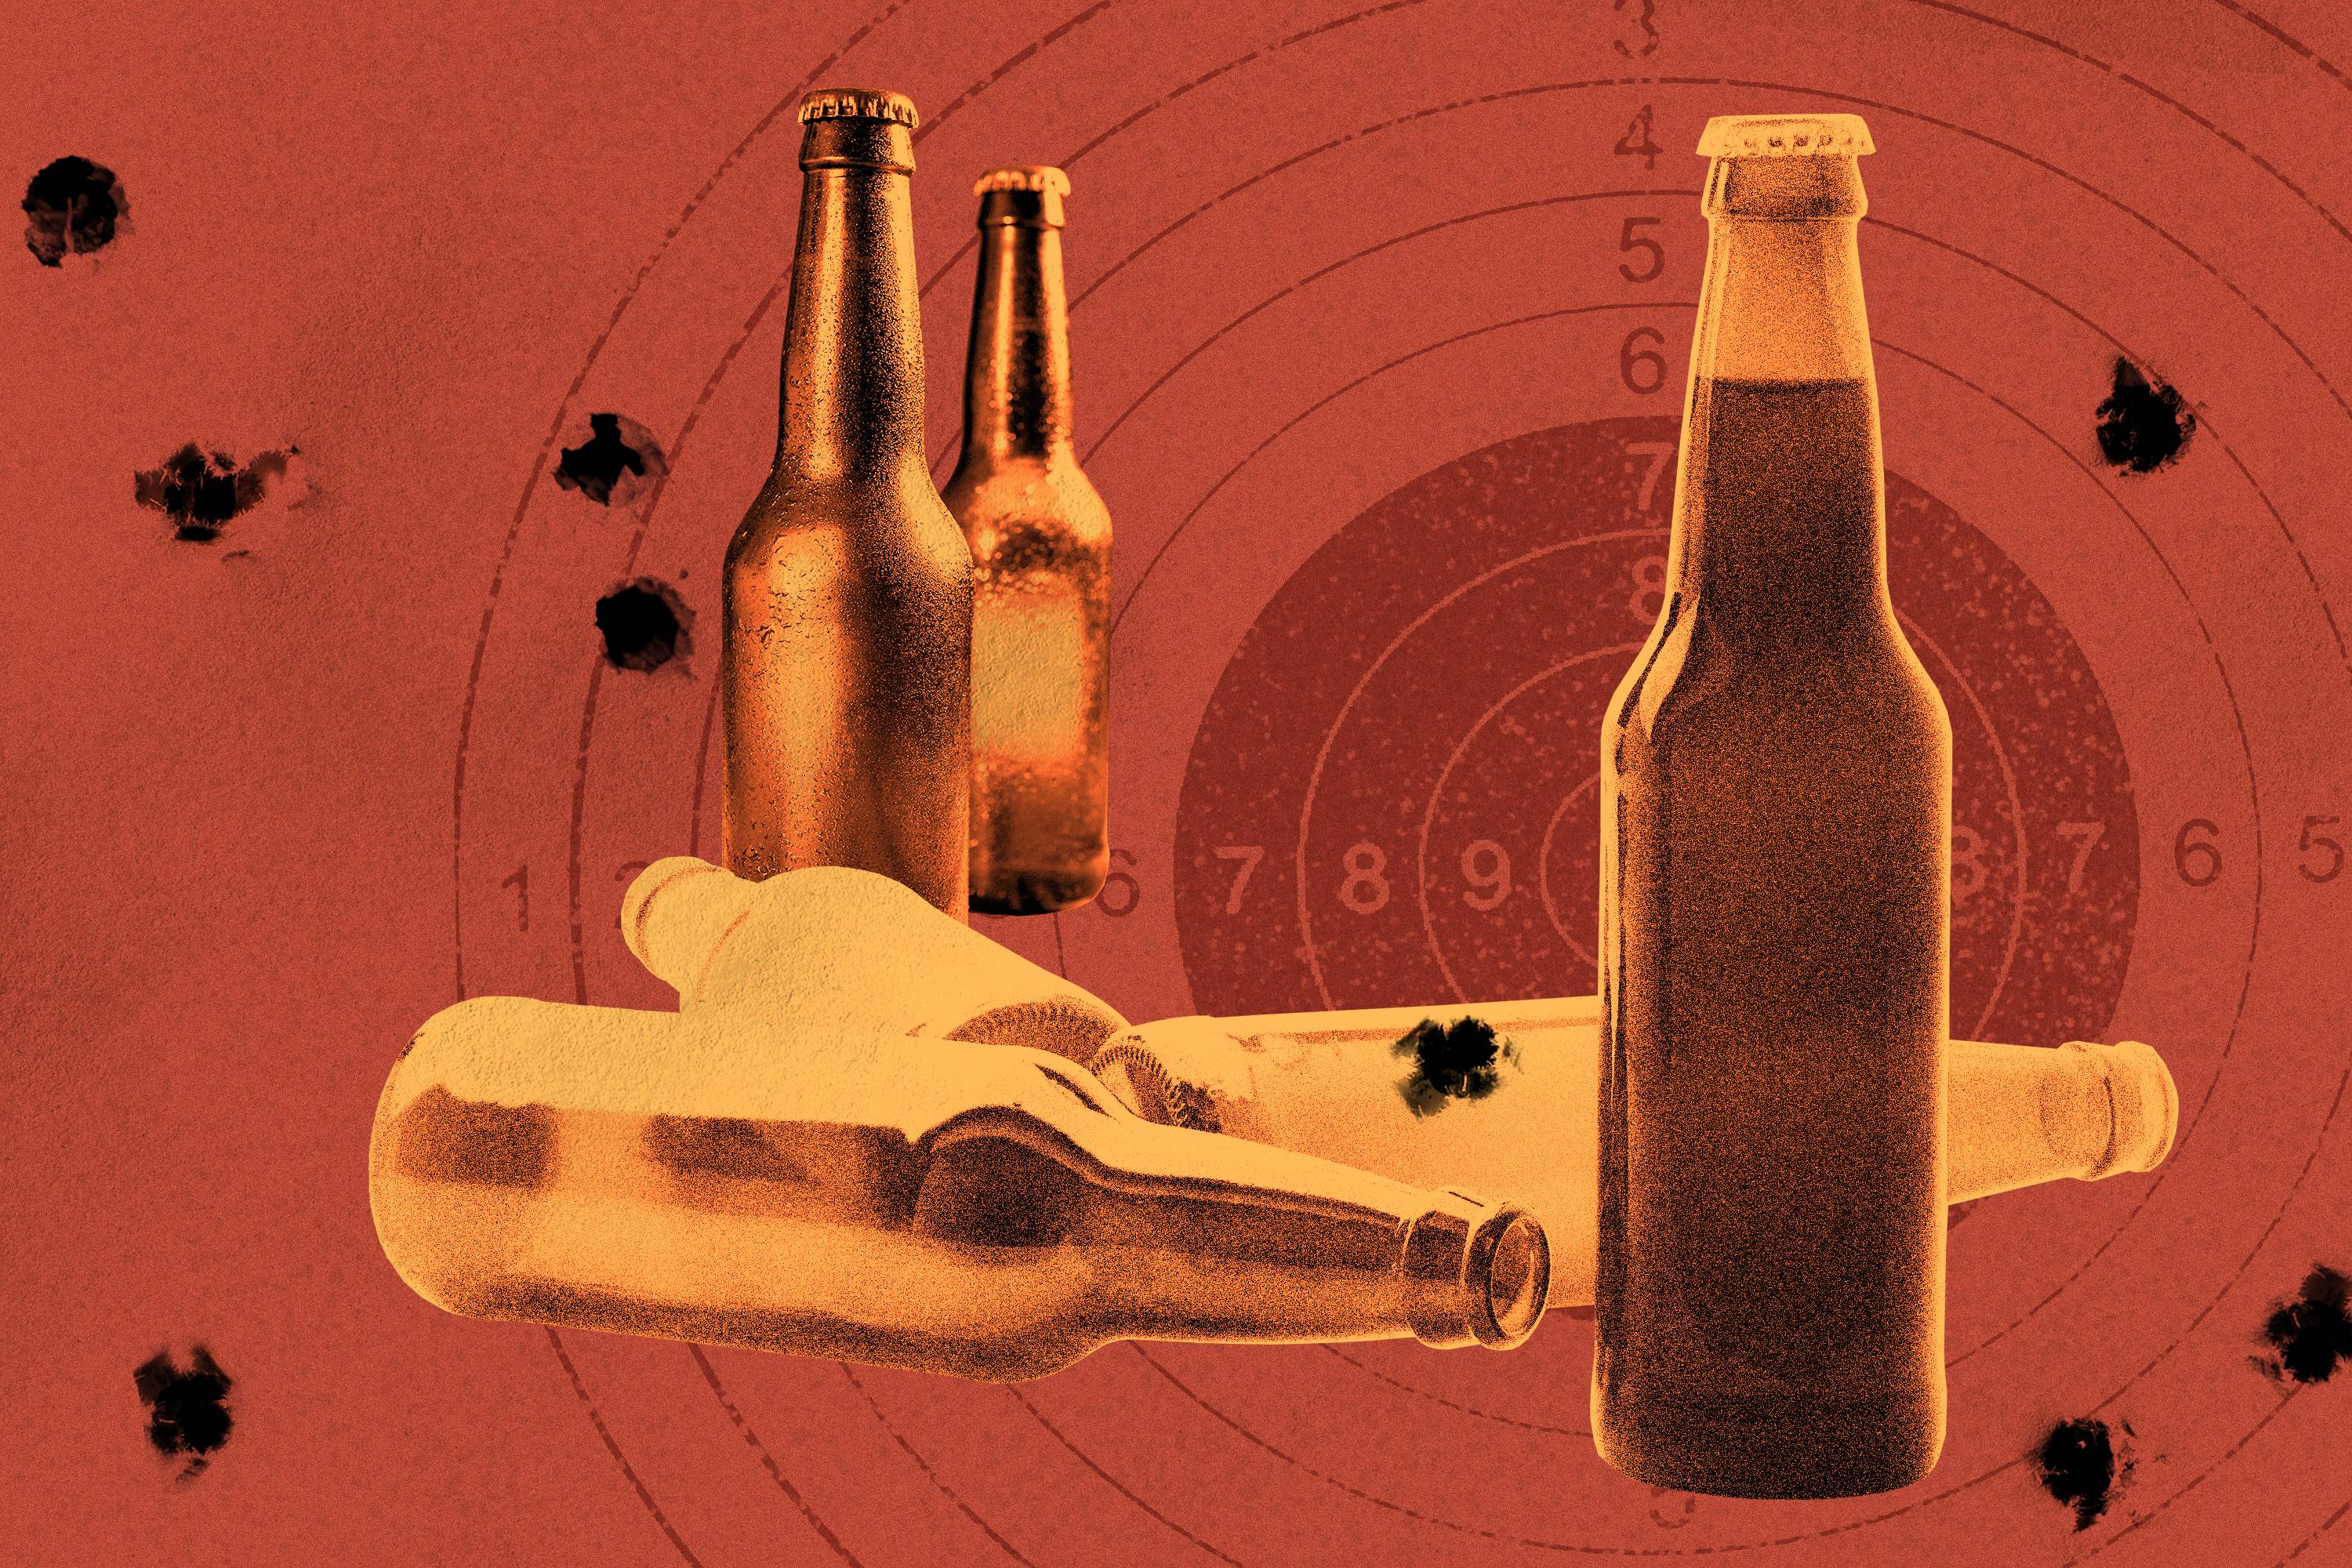 Photo collage showing numerous beer bottles against a shooting target in the background, with bullet holes scattered across the image.